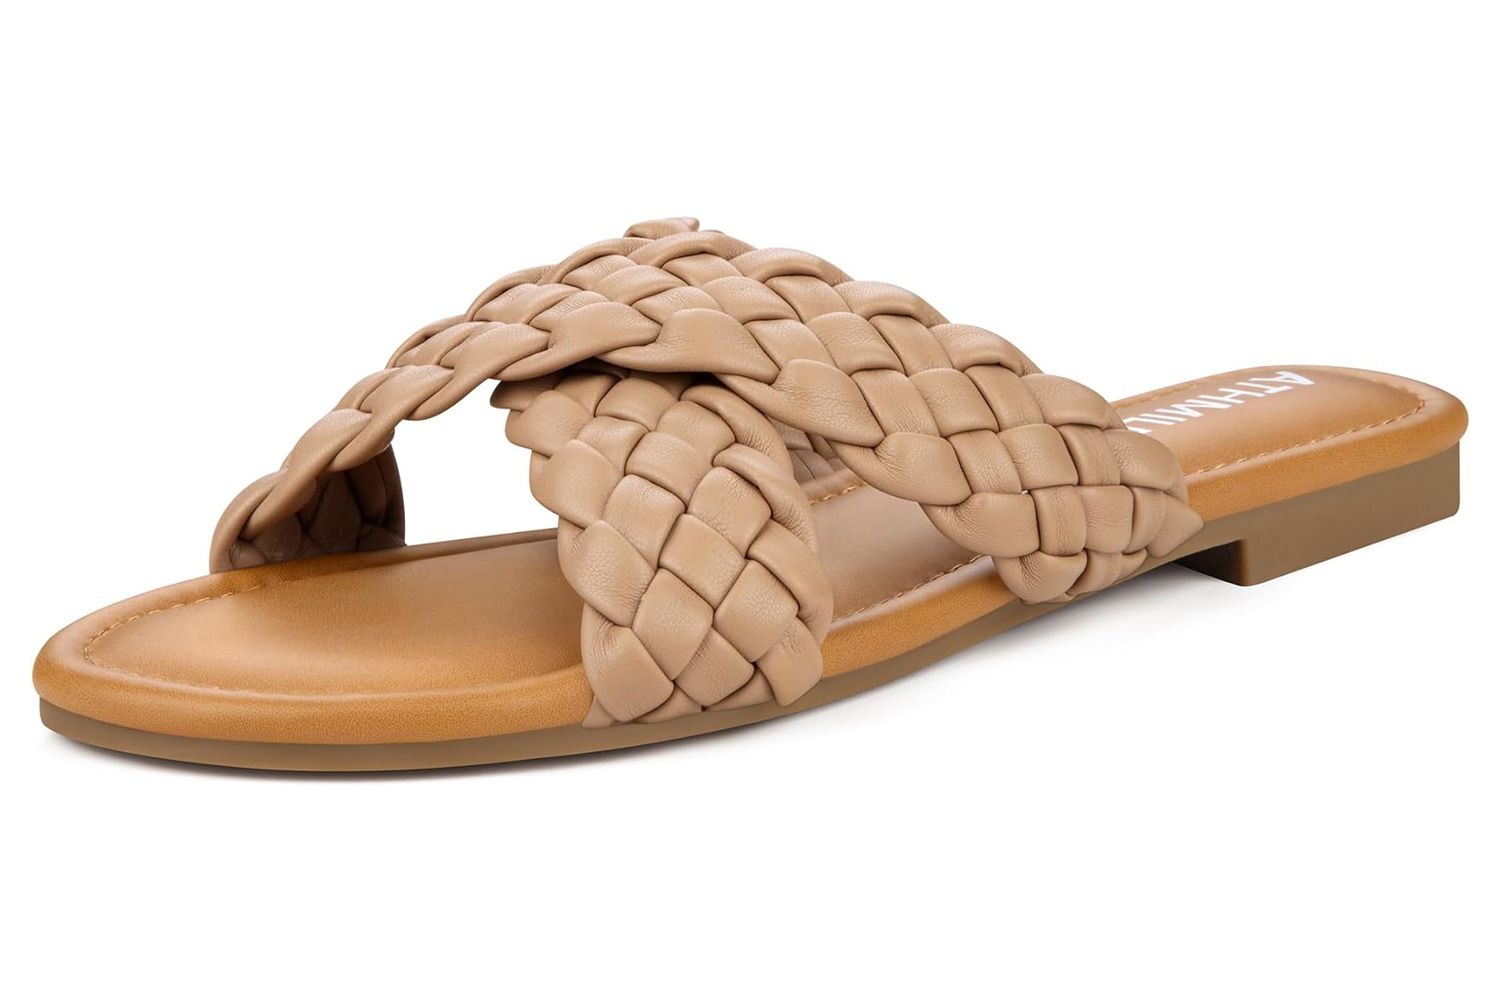 ATHMILE Women's Flat Sandals Crossover Braided